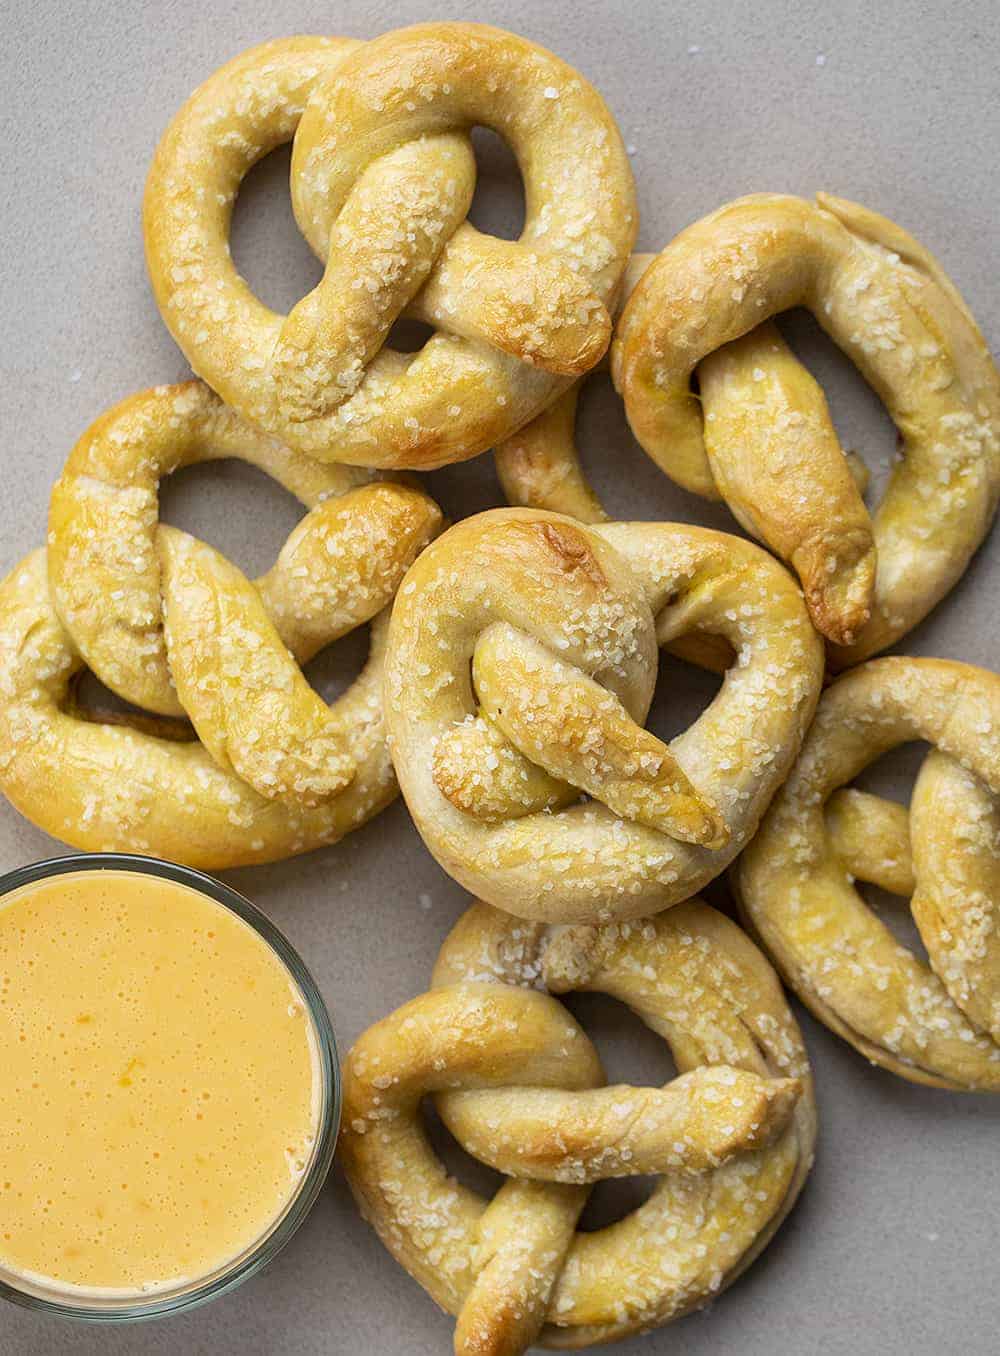 Overhead Image of Sourdough Homemade Pretzels with Cheese Dipping Sauce